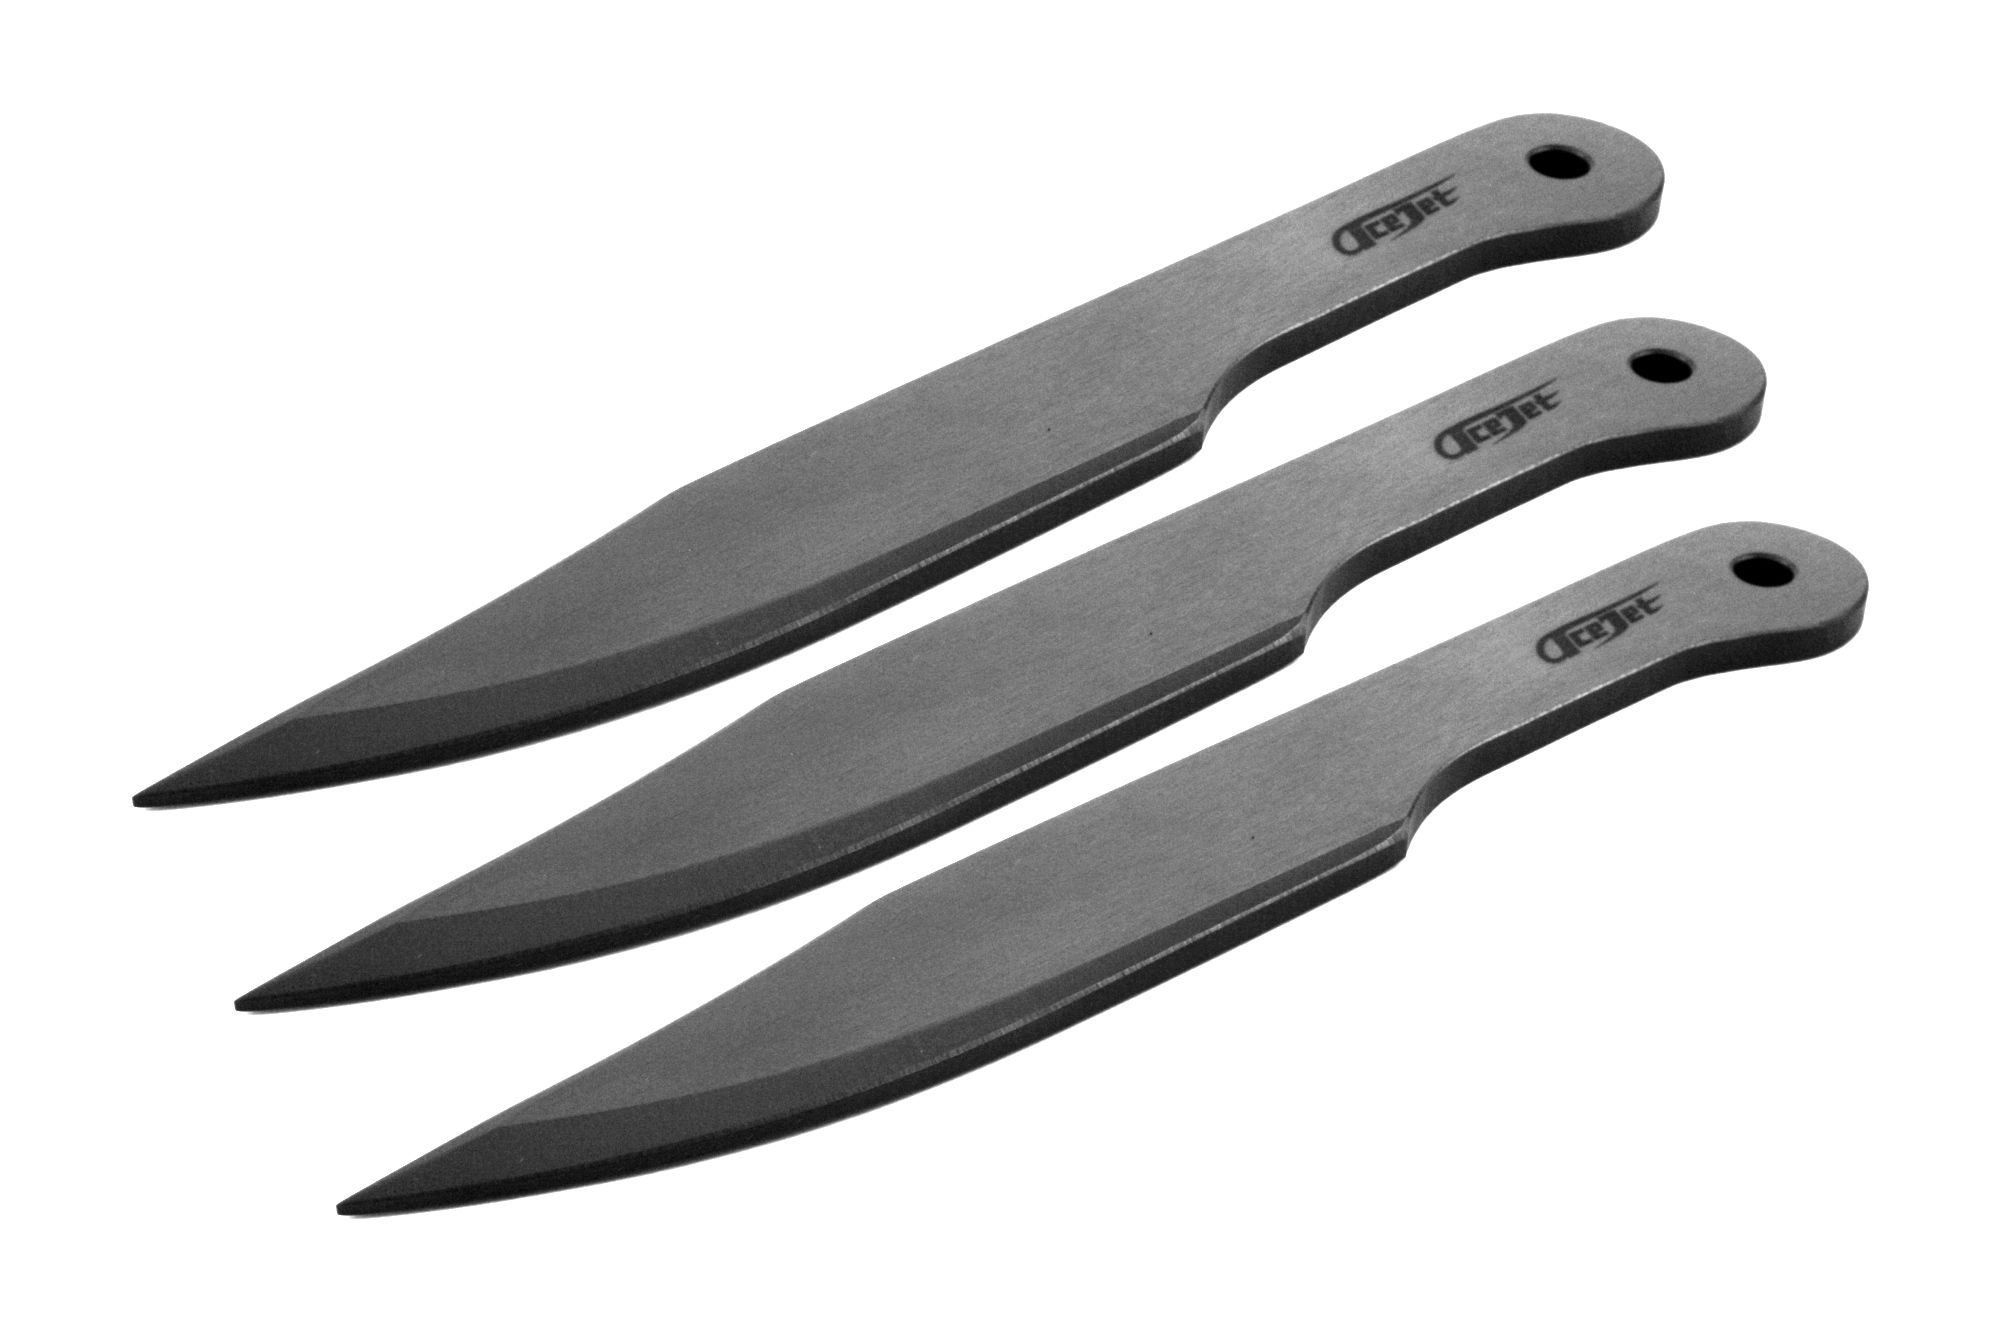 ACEJET BOWIE SHADOW Steel - Throwing knives - set of 3